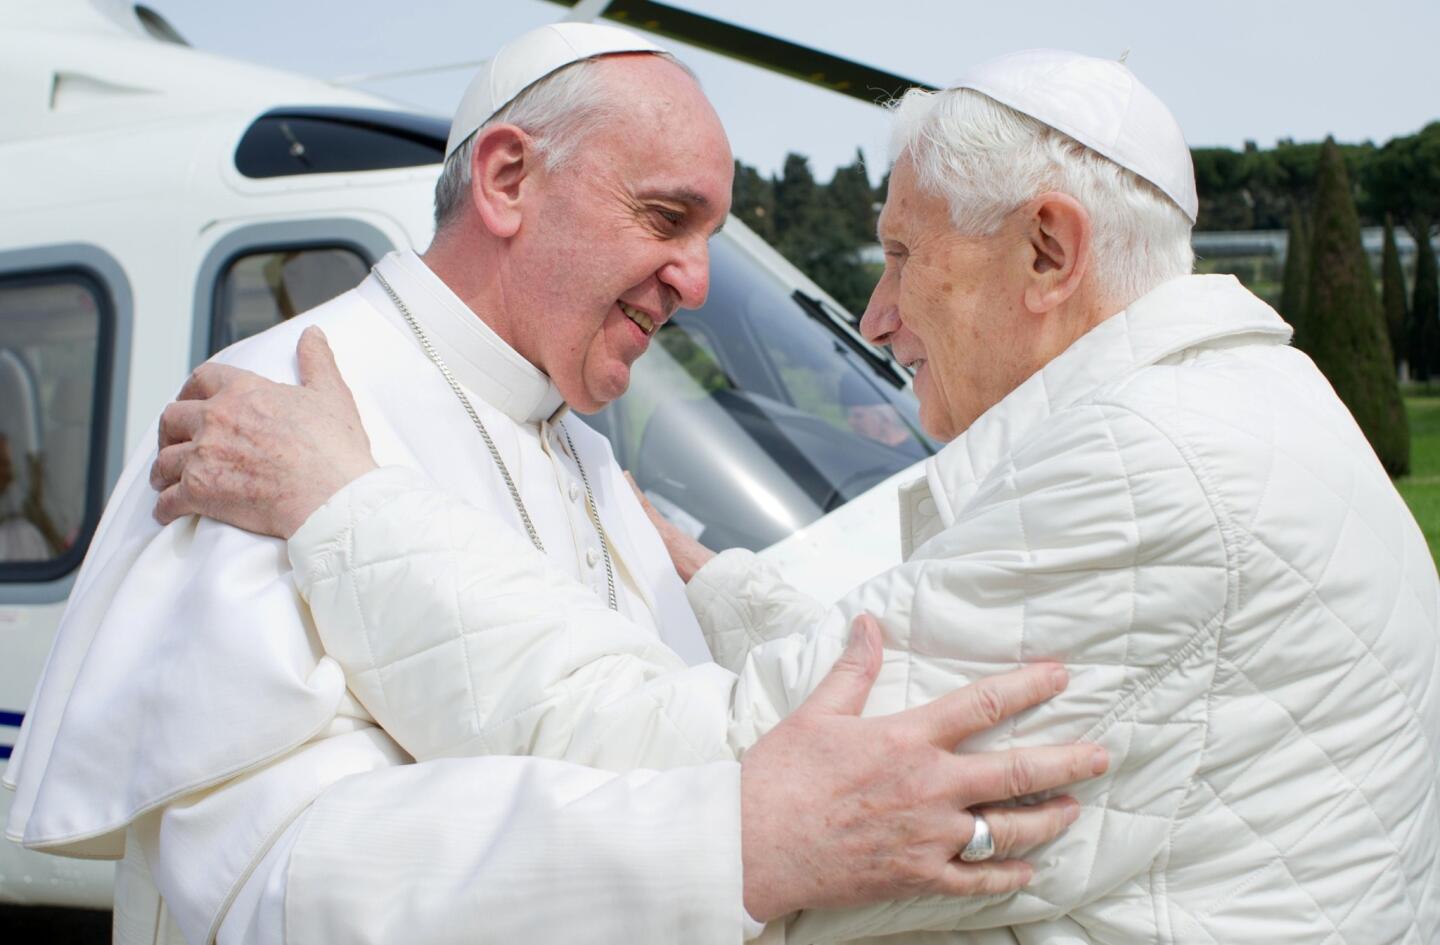 This handout picture released by the Vatican press office on March 23, 2013 shows "pope emeritus" Benedict XVI (R) greeting Pope Francis upon his arrival at the heliport in Castel Gandolfo. Pope Francis prepared to go face to face with his predecessor Benedict XVI on Saturday in a historic meeting between two men with very different styles but important core similarities. Birthday: April 16, 1927